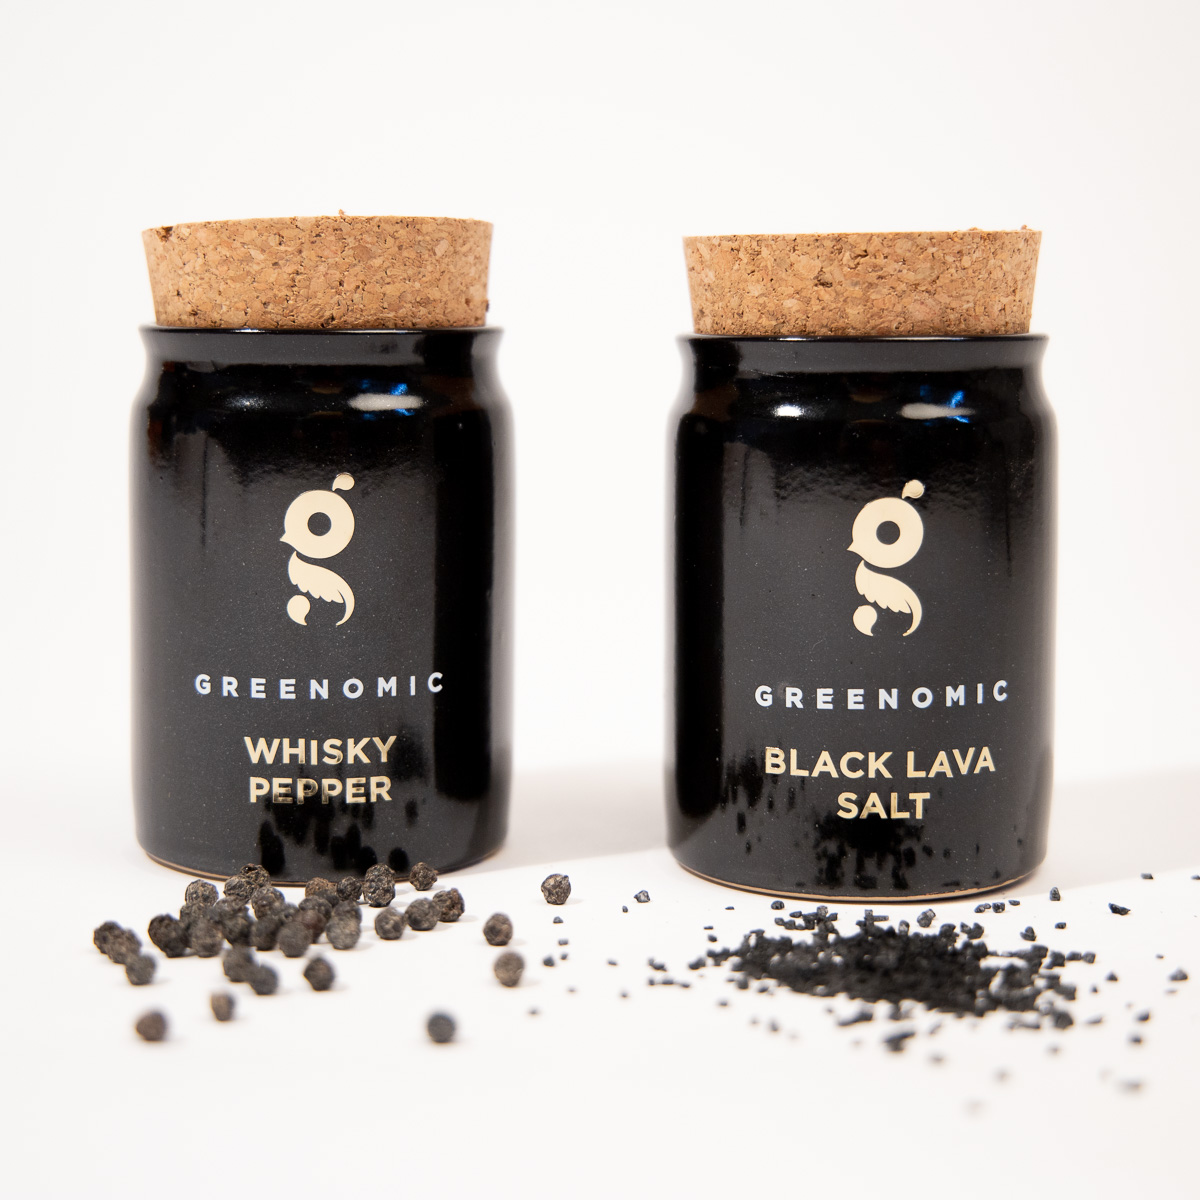 Black Lava zout of Whisky peper